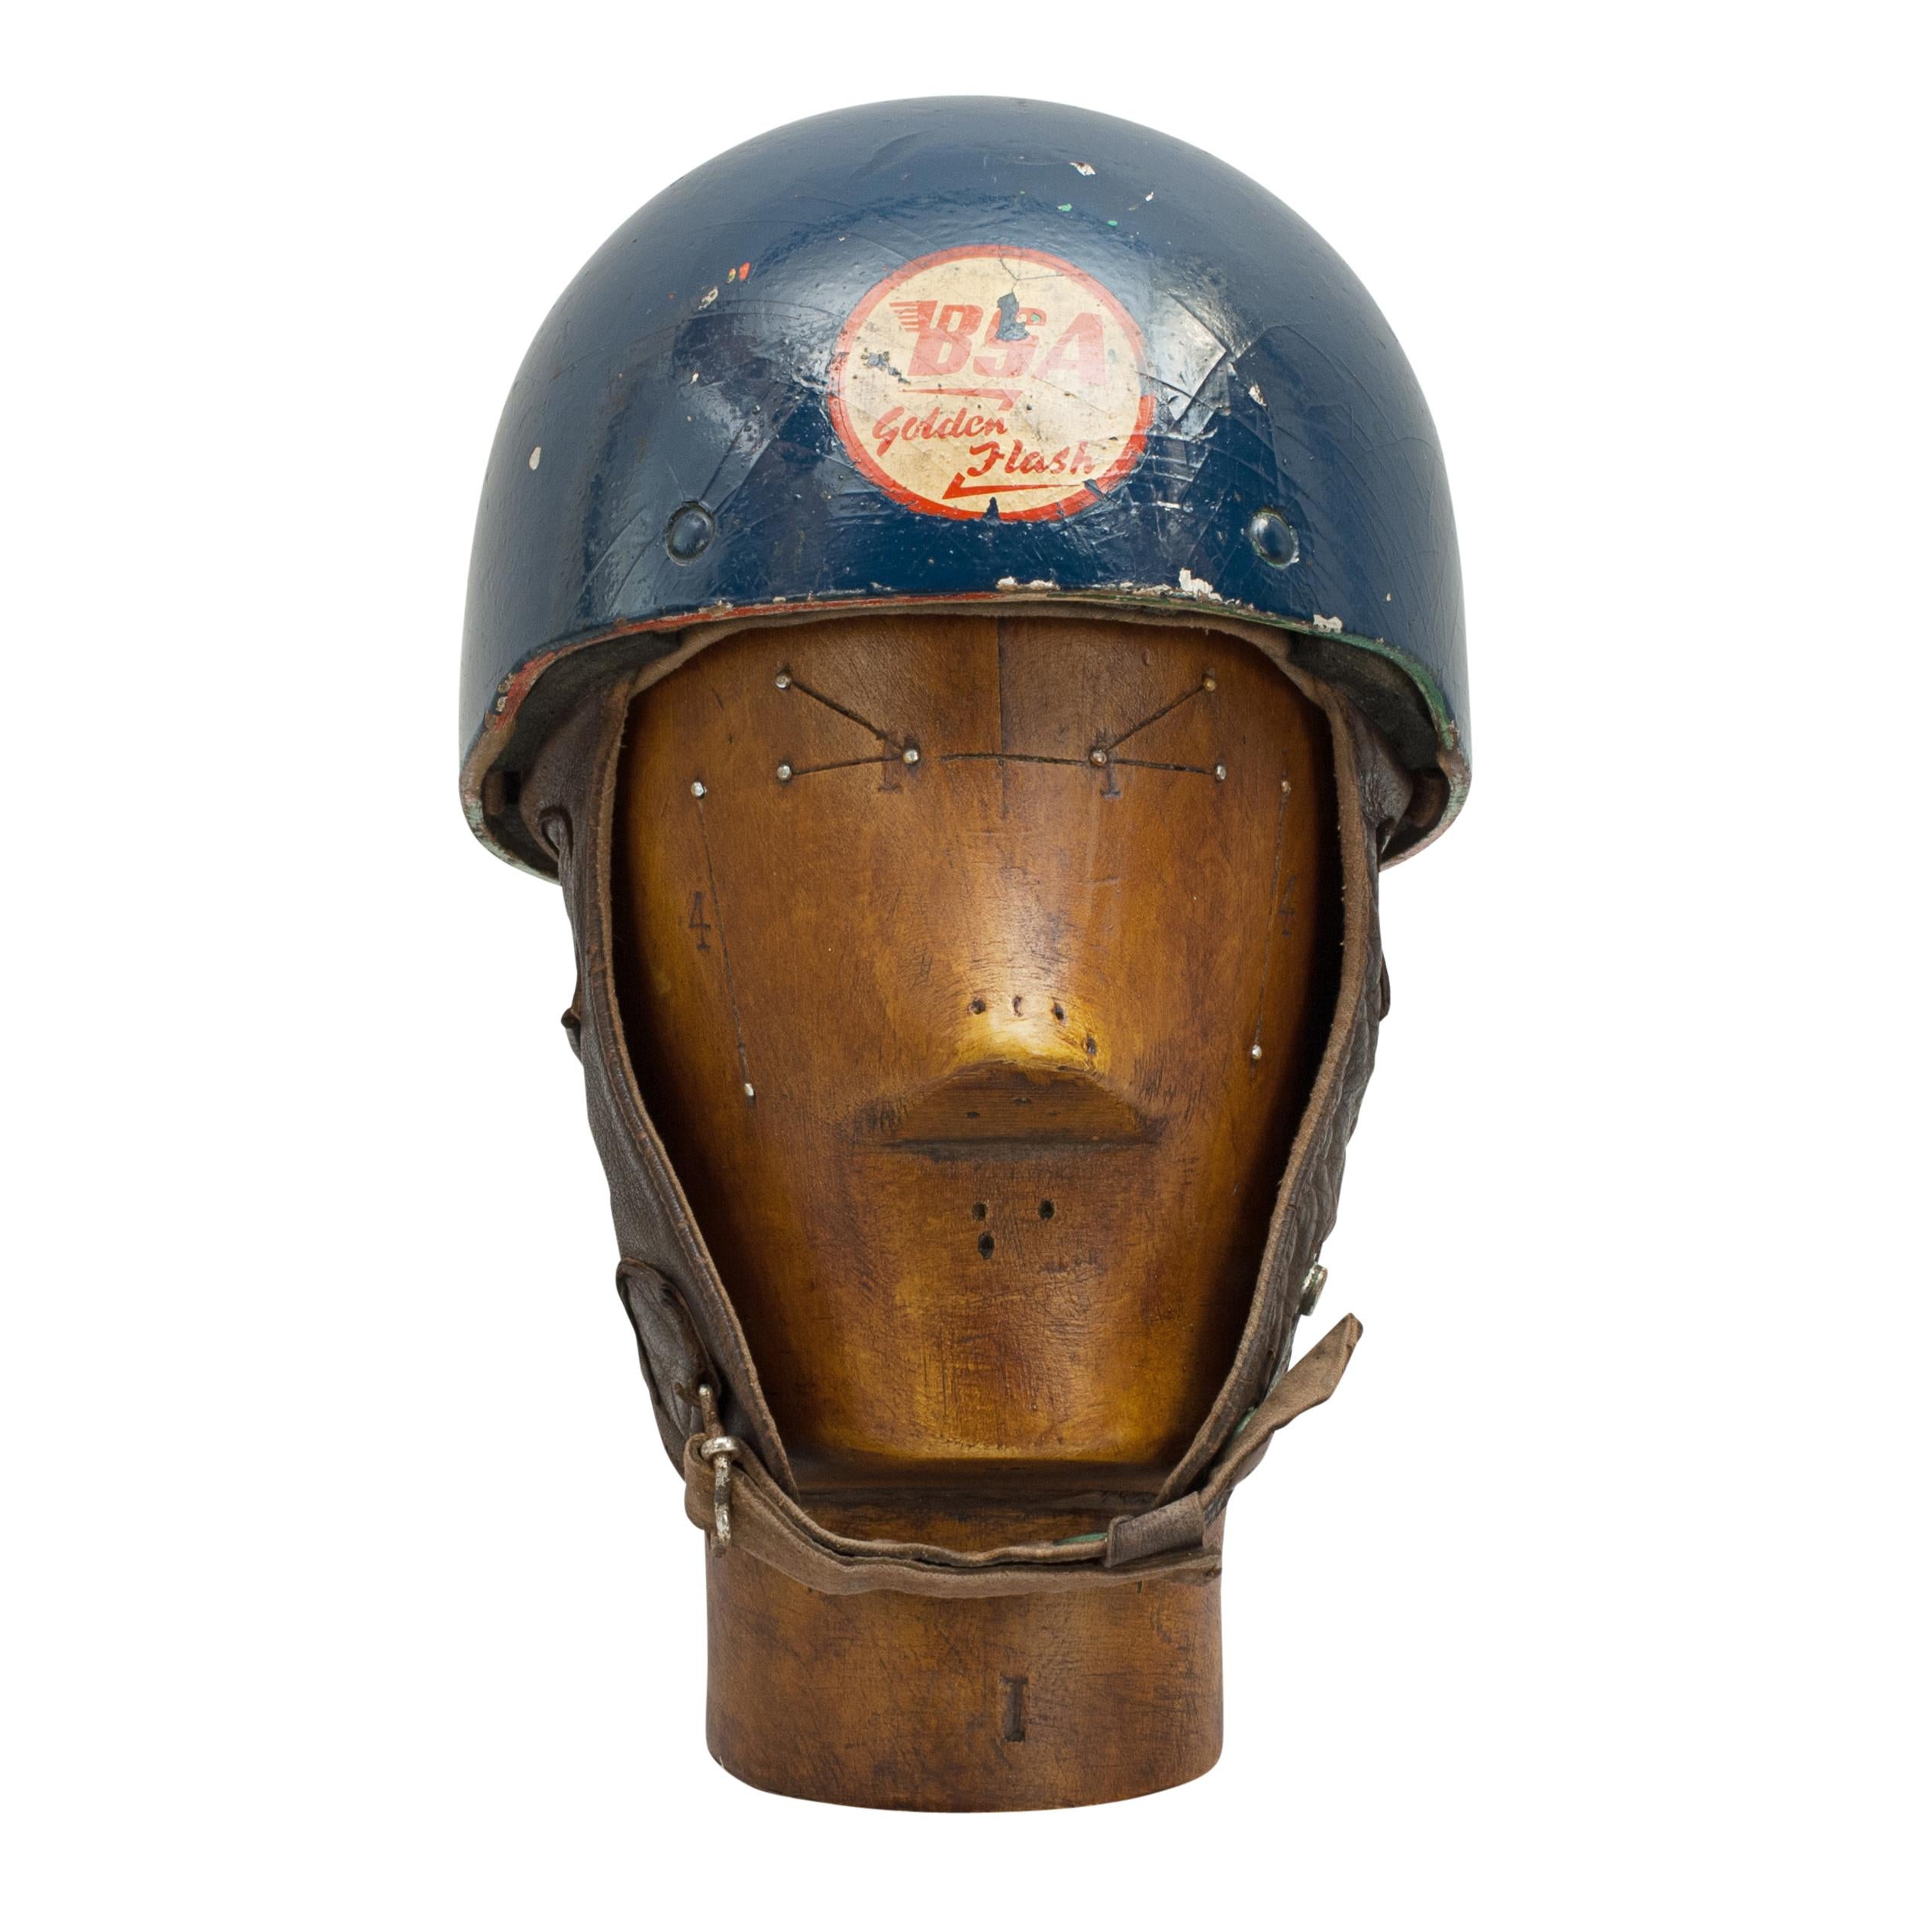 Motorcycle helmet.
A dark blue helmet made in England by Cromwell, The 'Noll'. The pudding basin motorcycle helmet is fitted with a material headband and straps keeping a space between the head and outer case of the helmet. Strong neck and ear